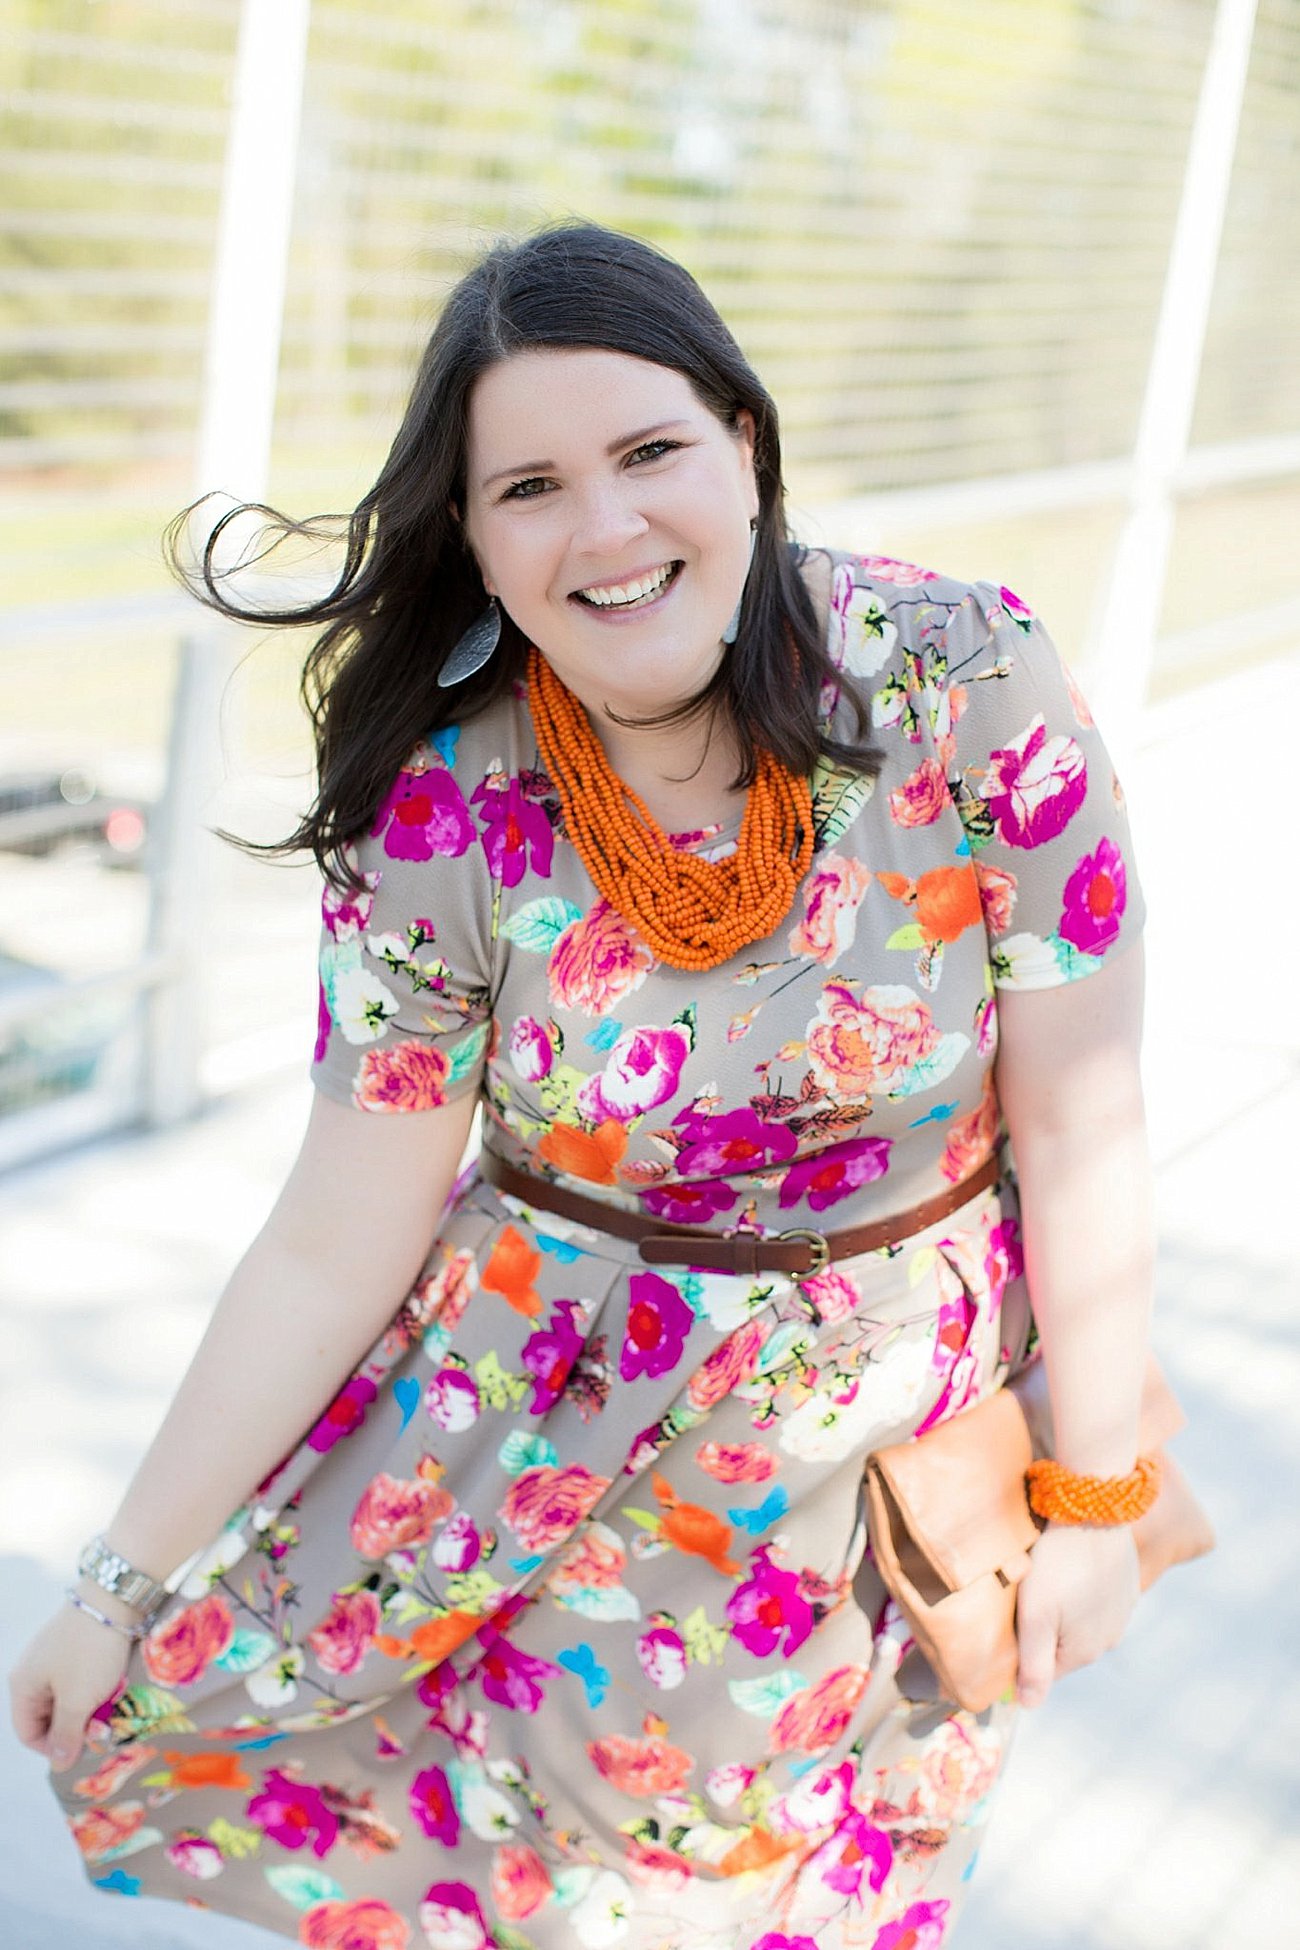 LulaRoe Floral Amelia Dress, The Root Collective Millie Smoking Shoe, Made for Freedom Lily Necklace and Bracelet, Sseko Designs Leather Clutch, Nickel and Suede earrings | Mom Style | North Carolina Fashion & Style Blogger (2)